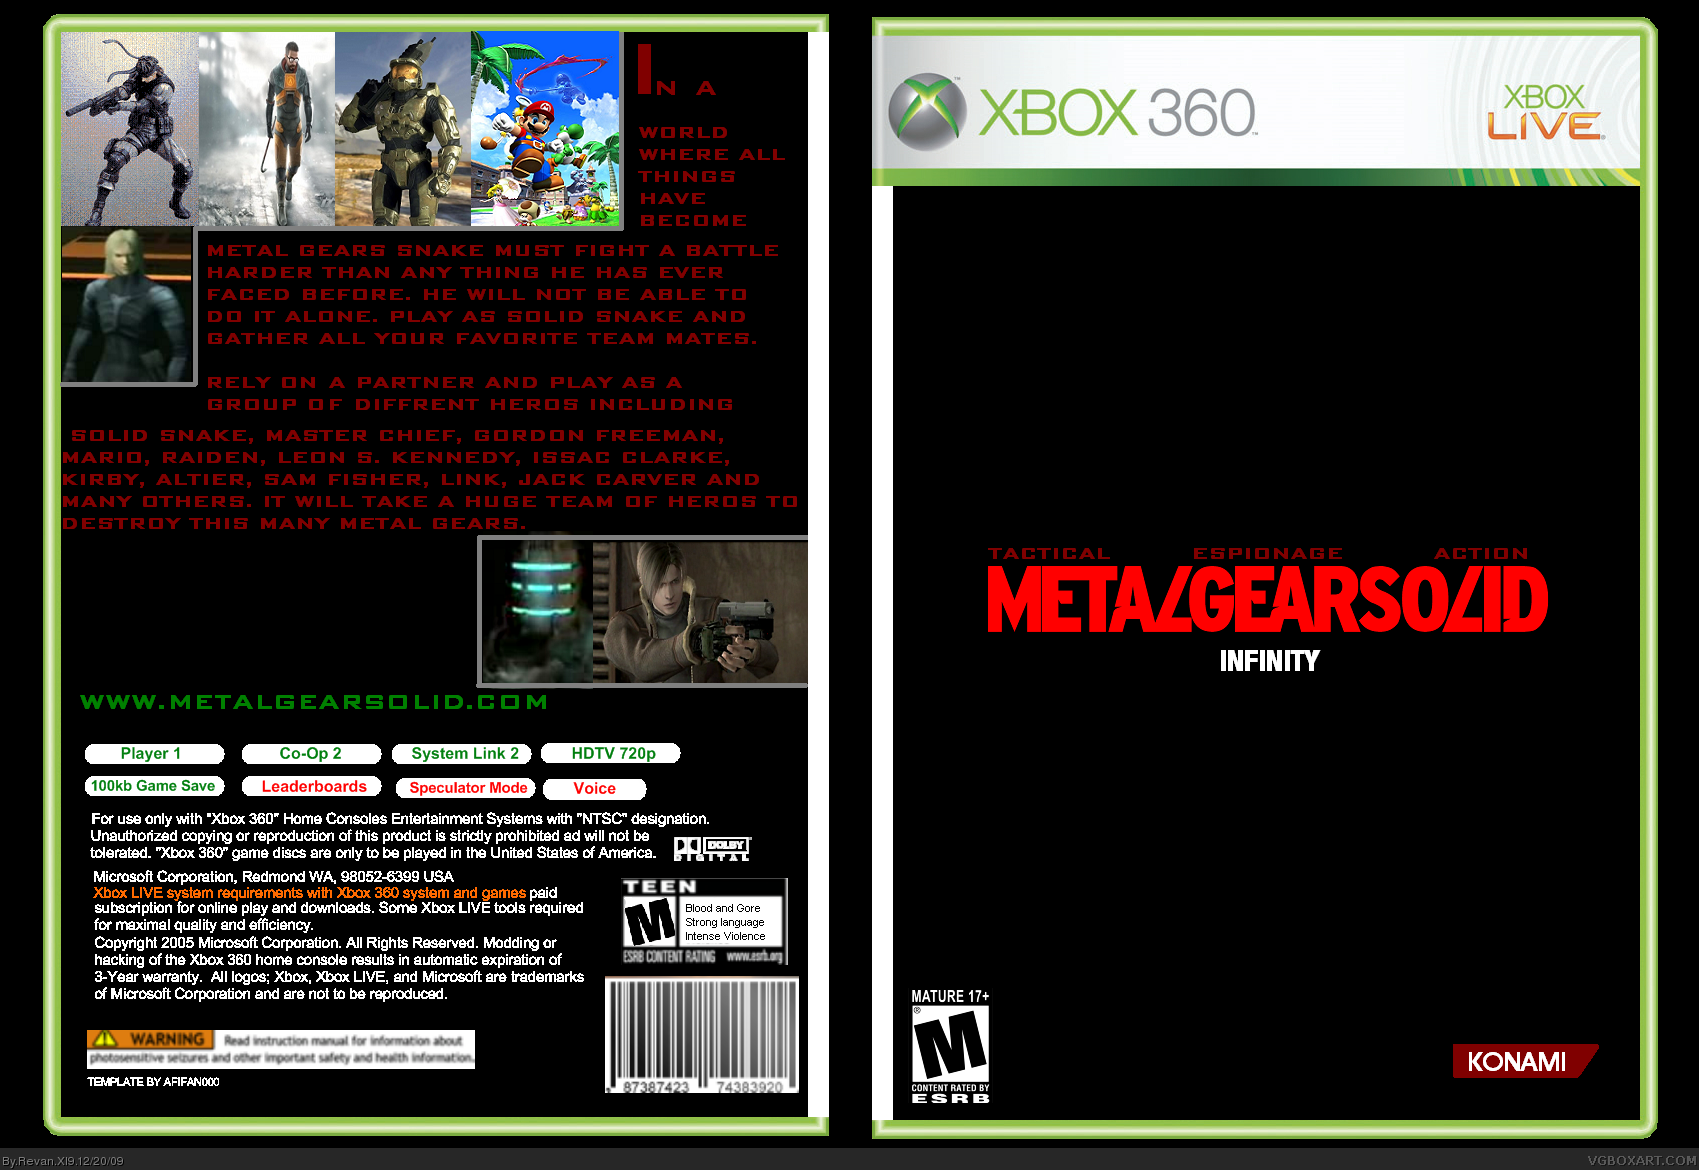 Metal Gear solid Infinity box cover